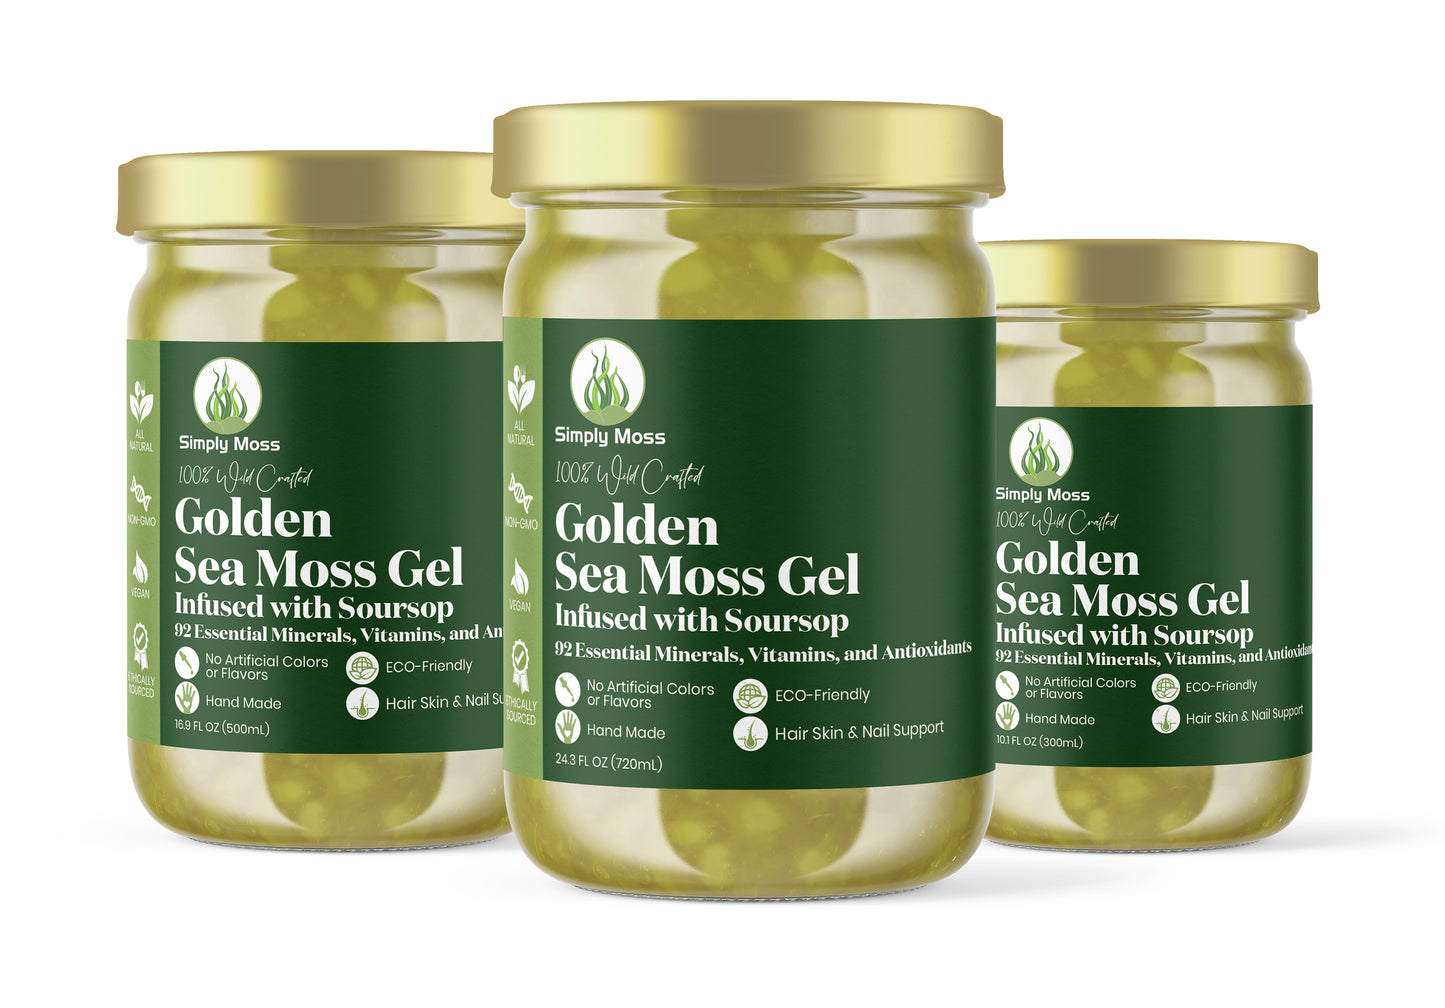 Golden Sea Moss Gel Infused with Soursop